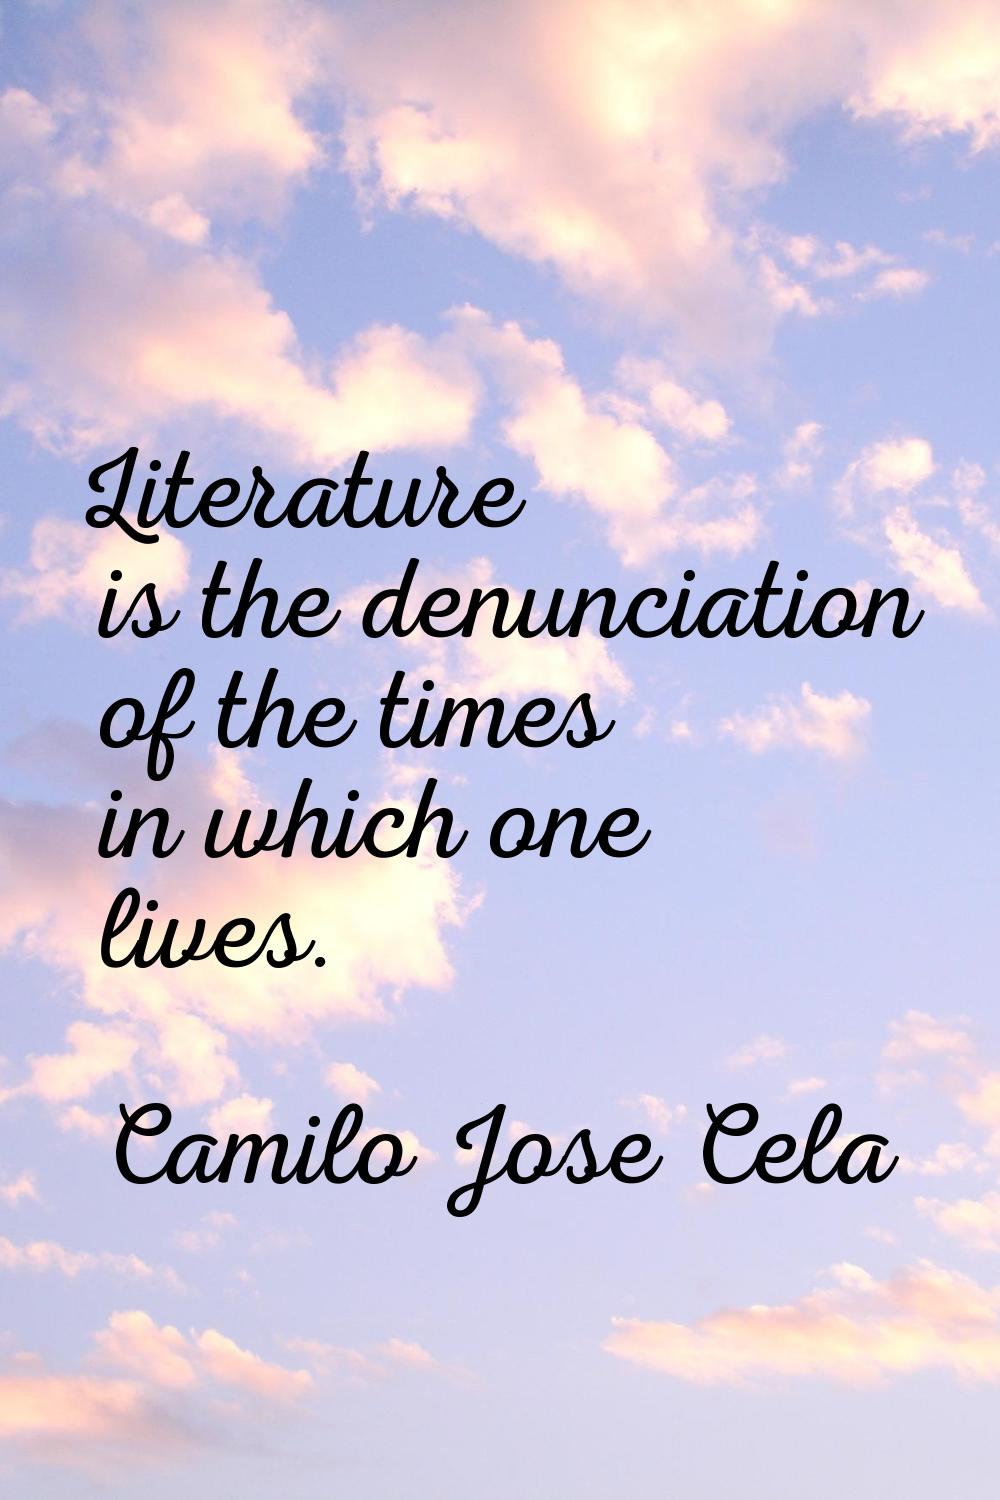 Literature is the denunciation of the times in which one lives.